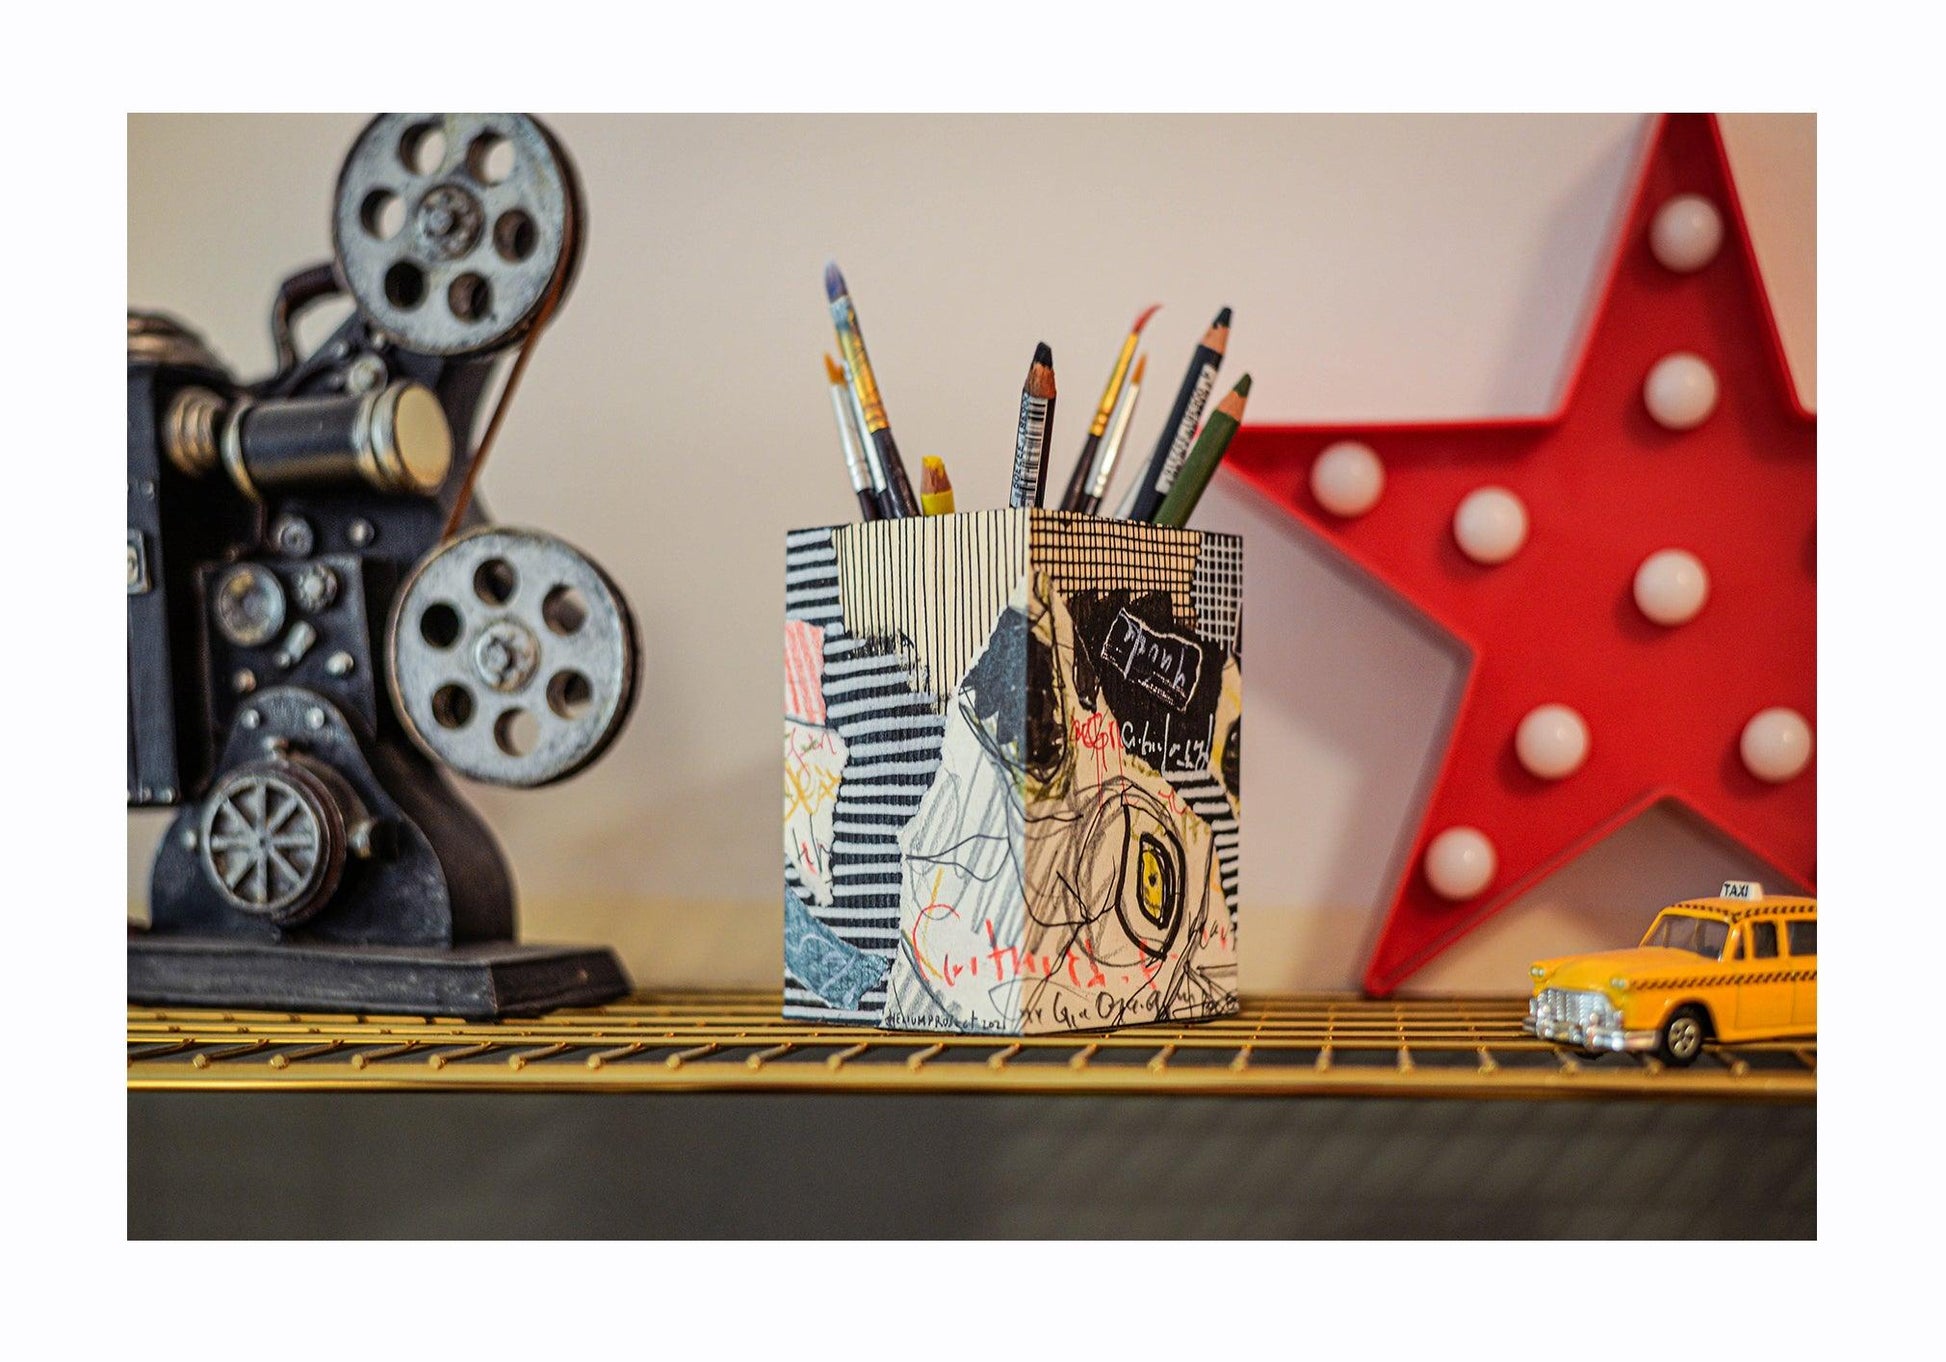 Black & White Wooden Pencil Holder - HeliumProject.gr